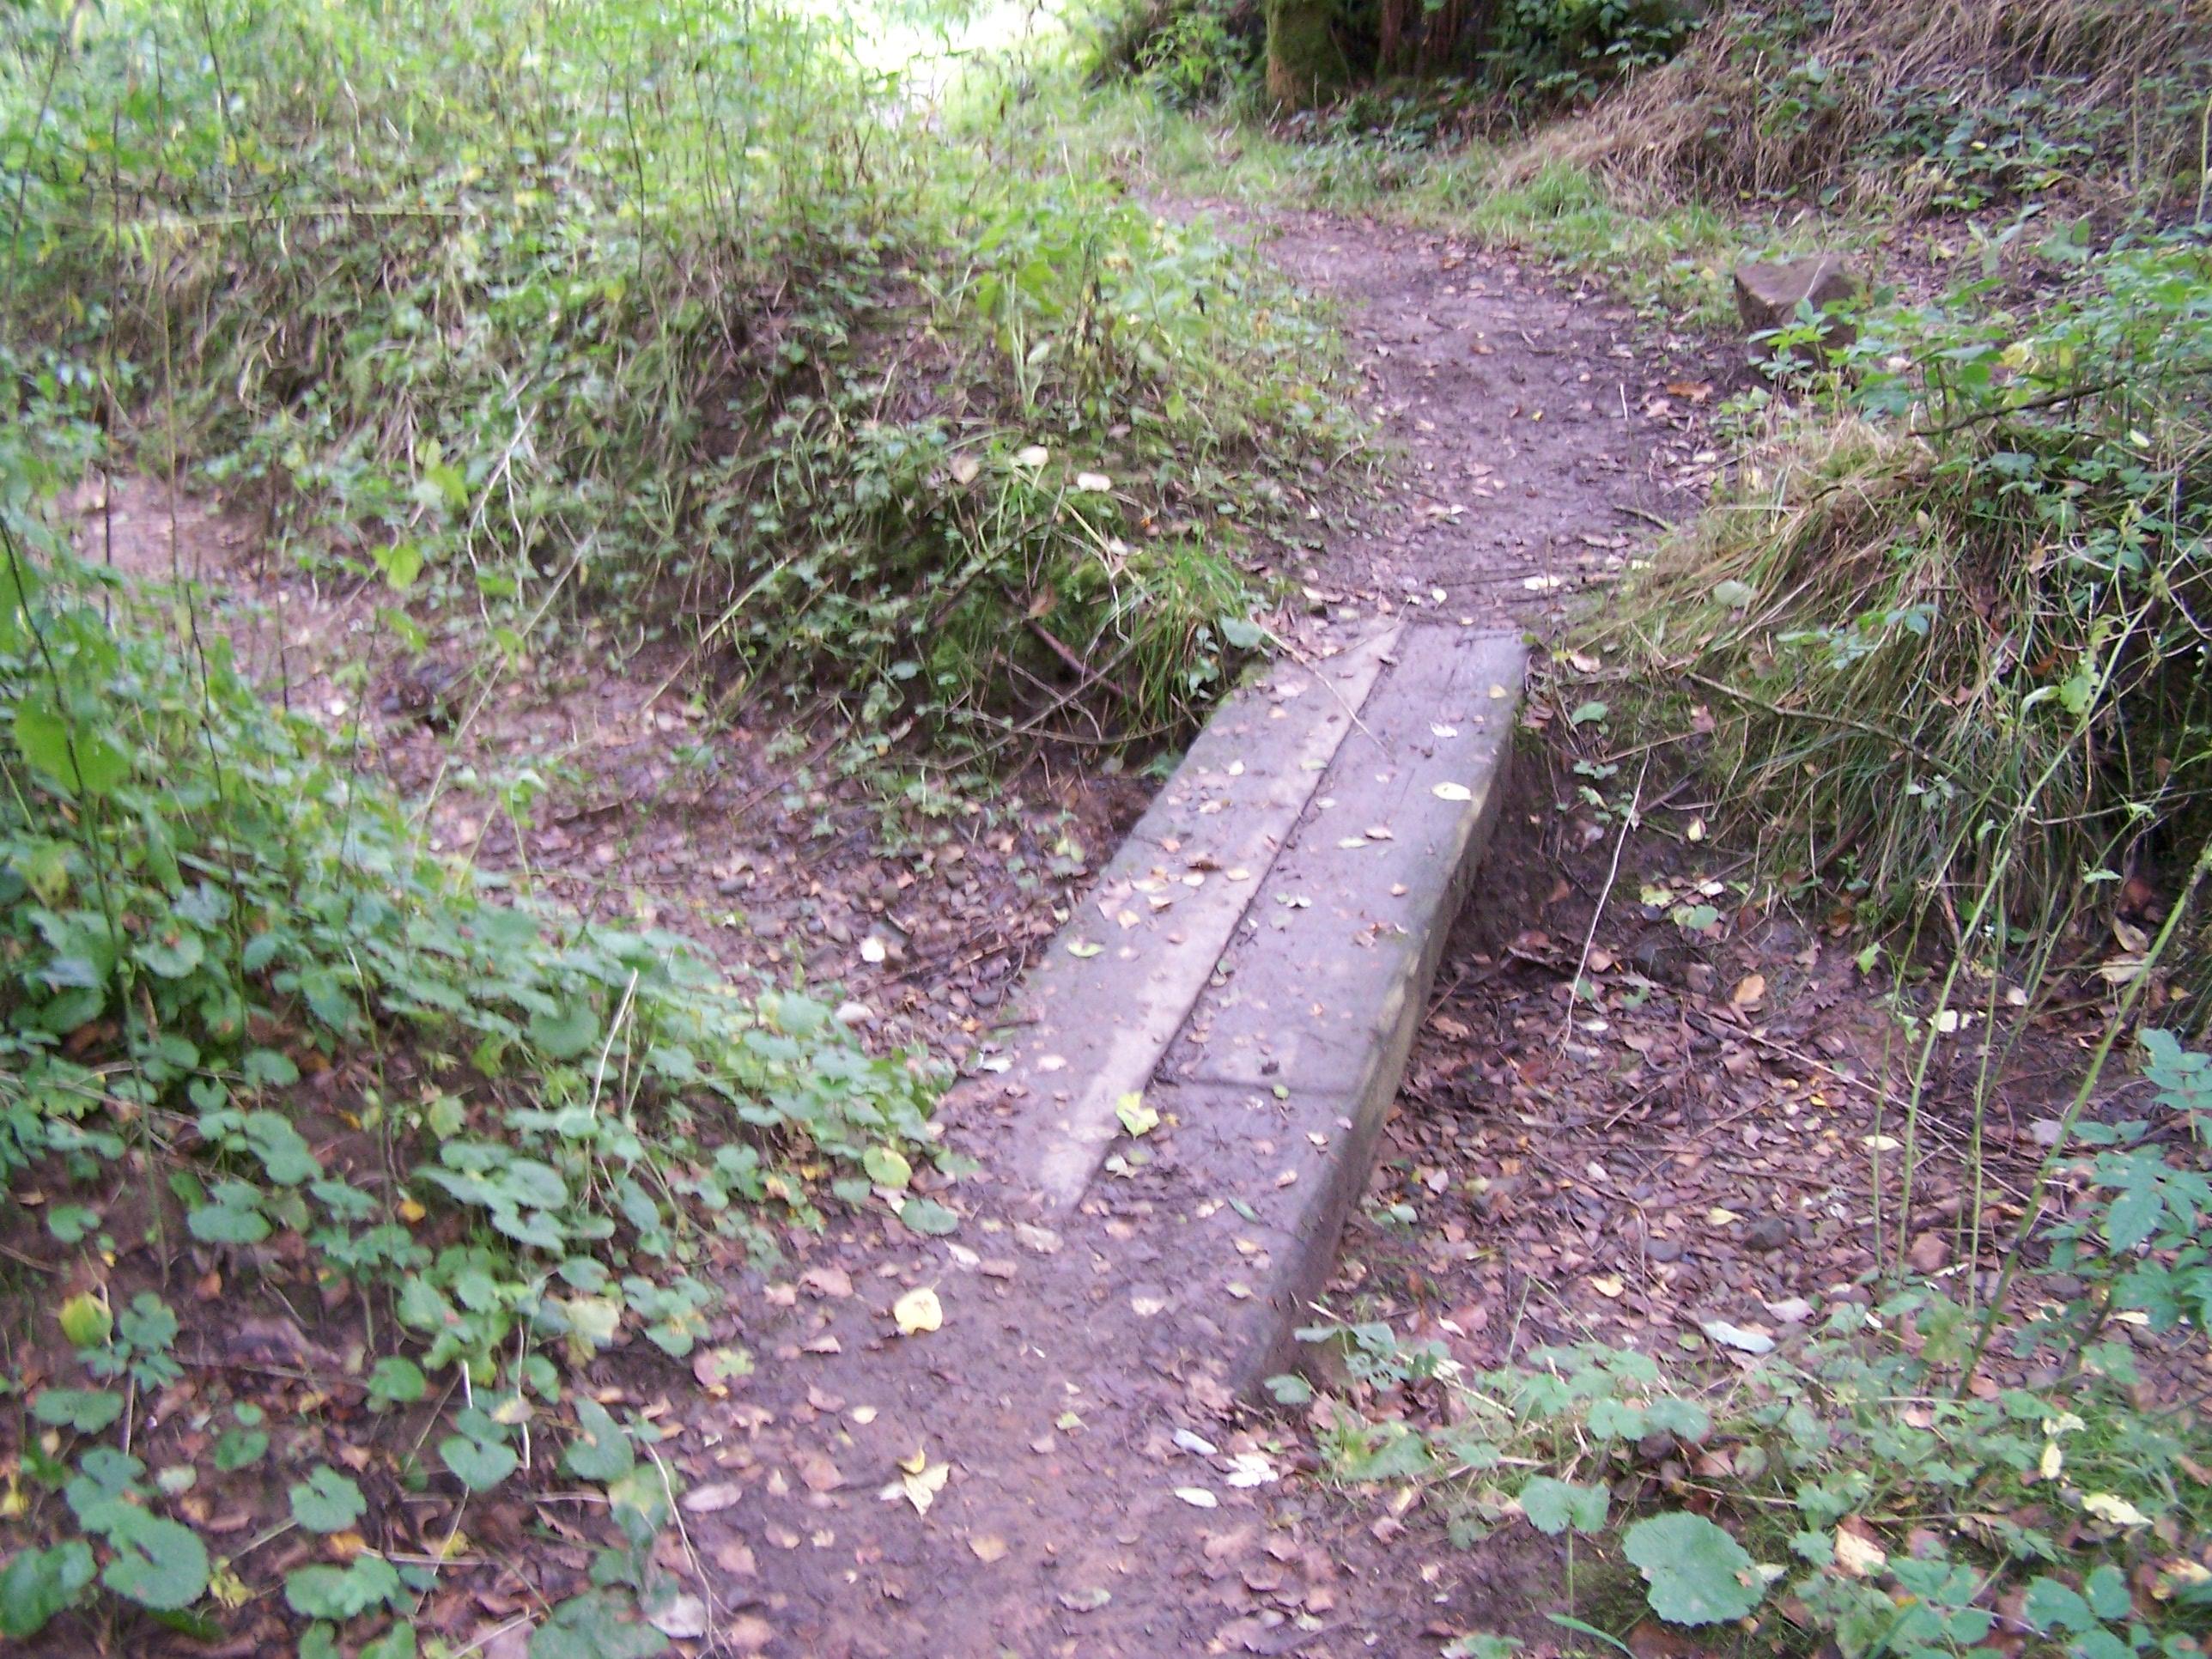 Photo taken by me - footpath in Daisy Nook, Ashton, Manchester